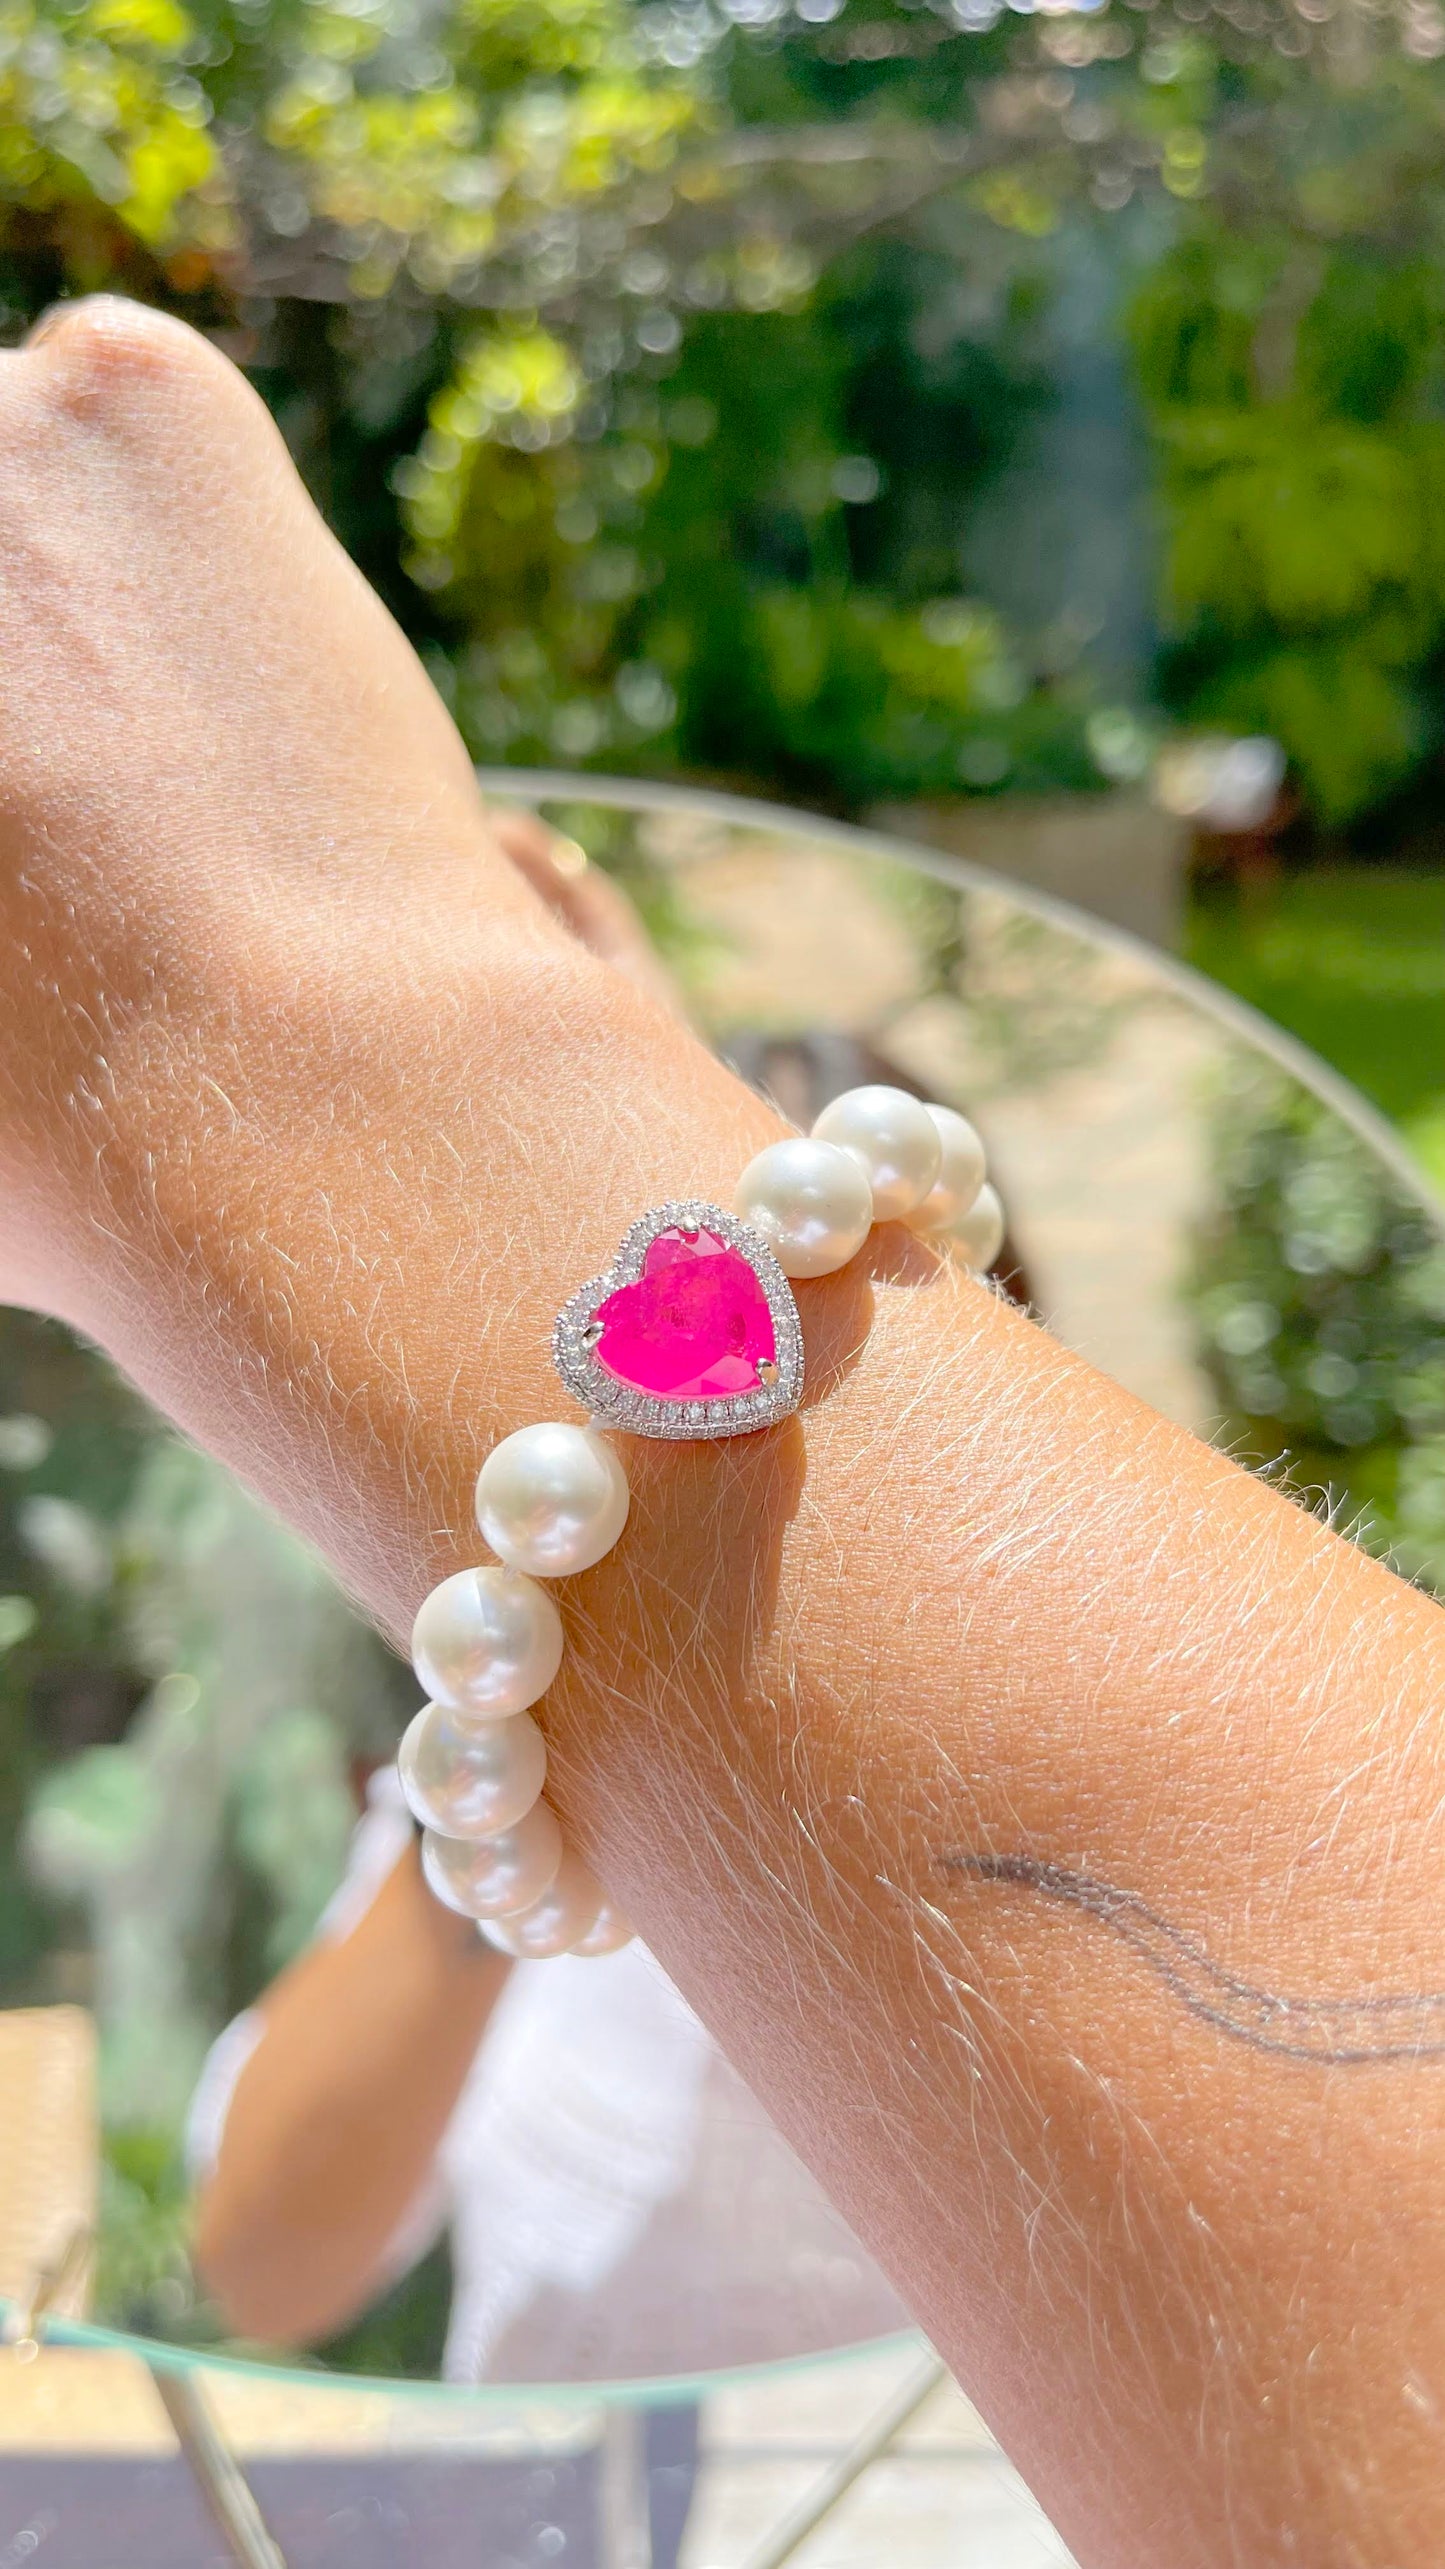 Pearl bracelet with pink tourmaline fusion heart